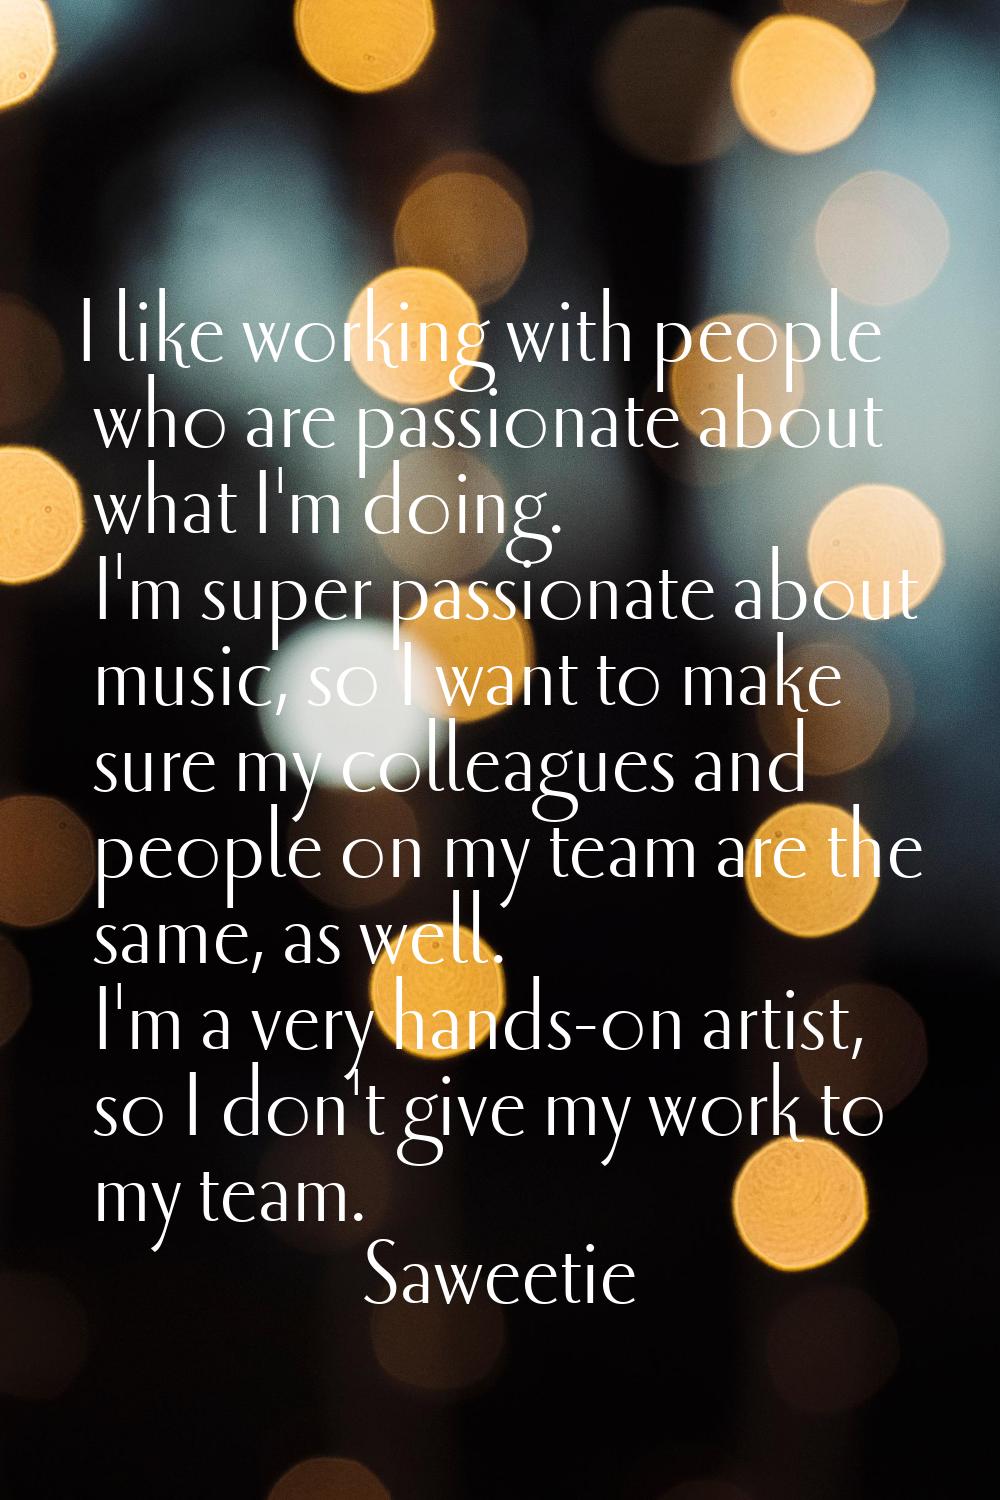 I like working with people who are passionate about what I'm doing. I'm super passionate about musi